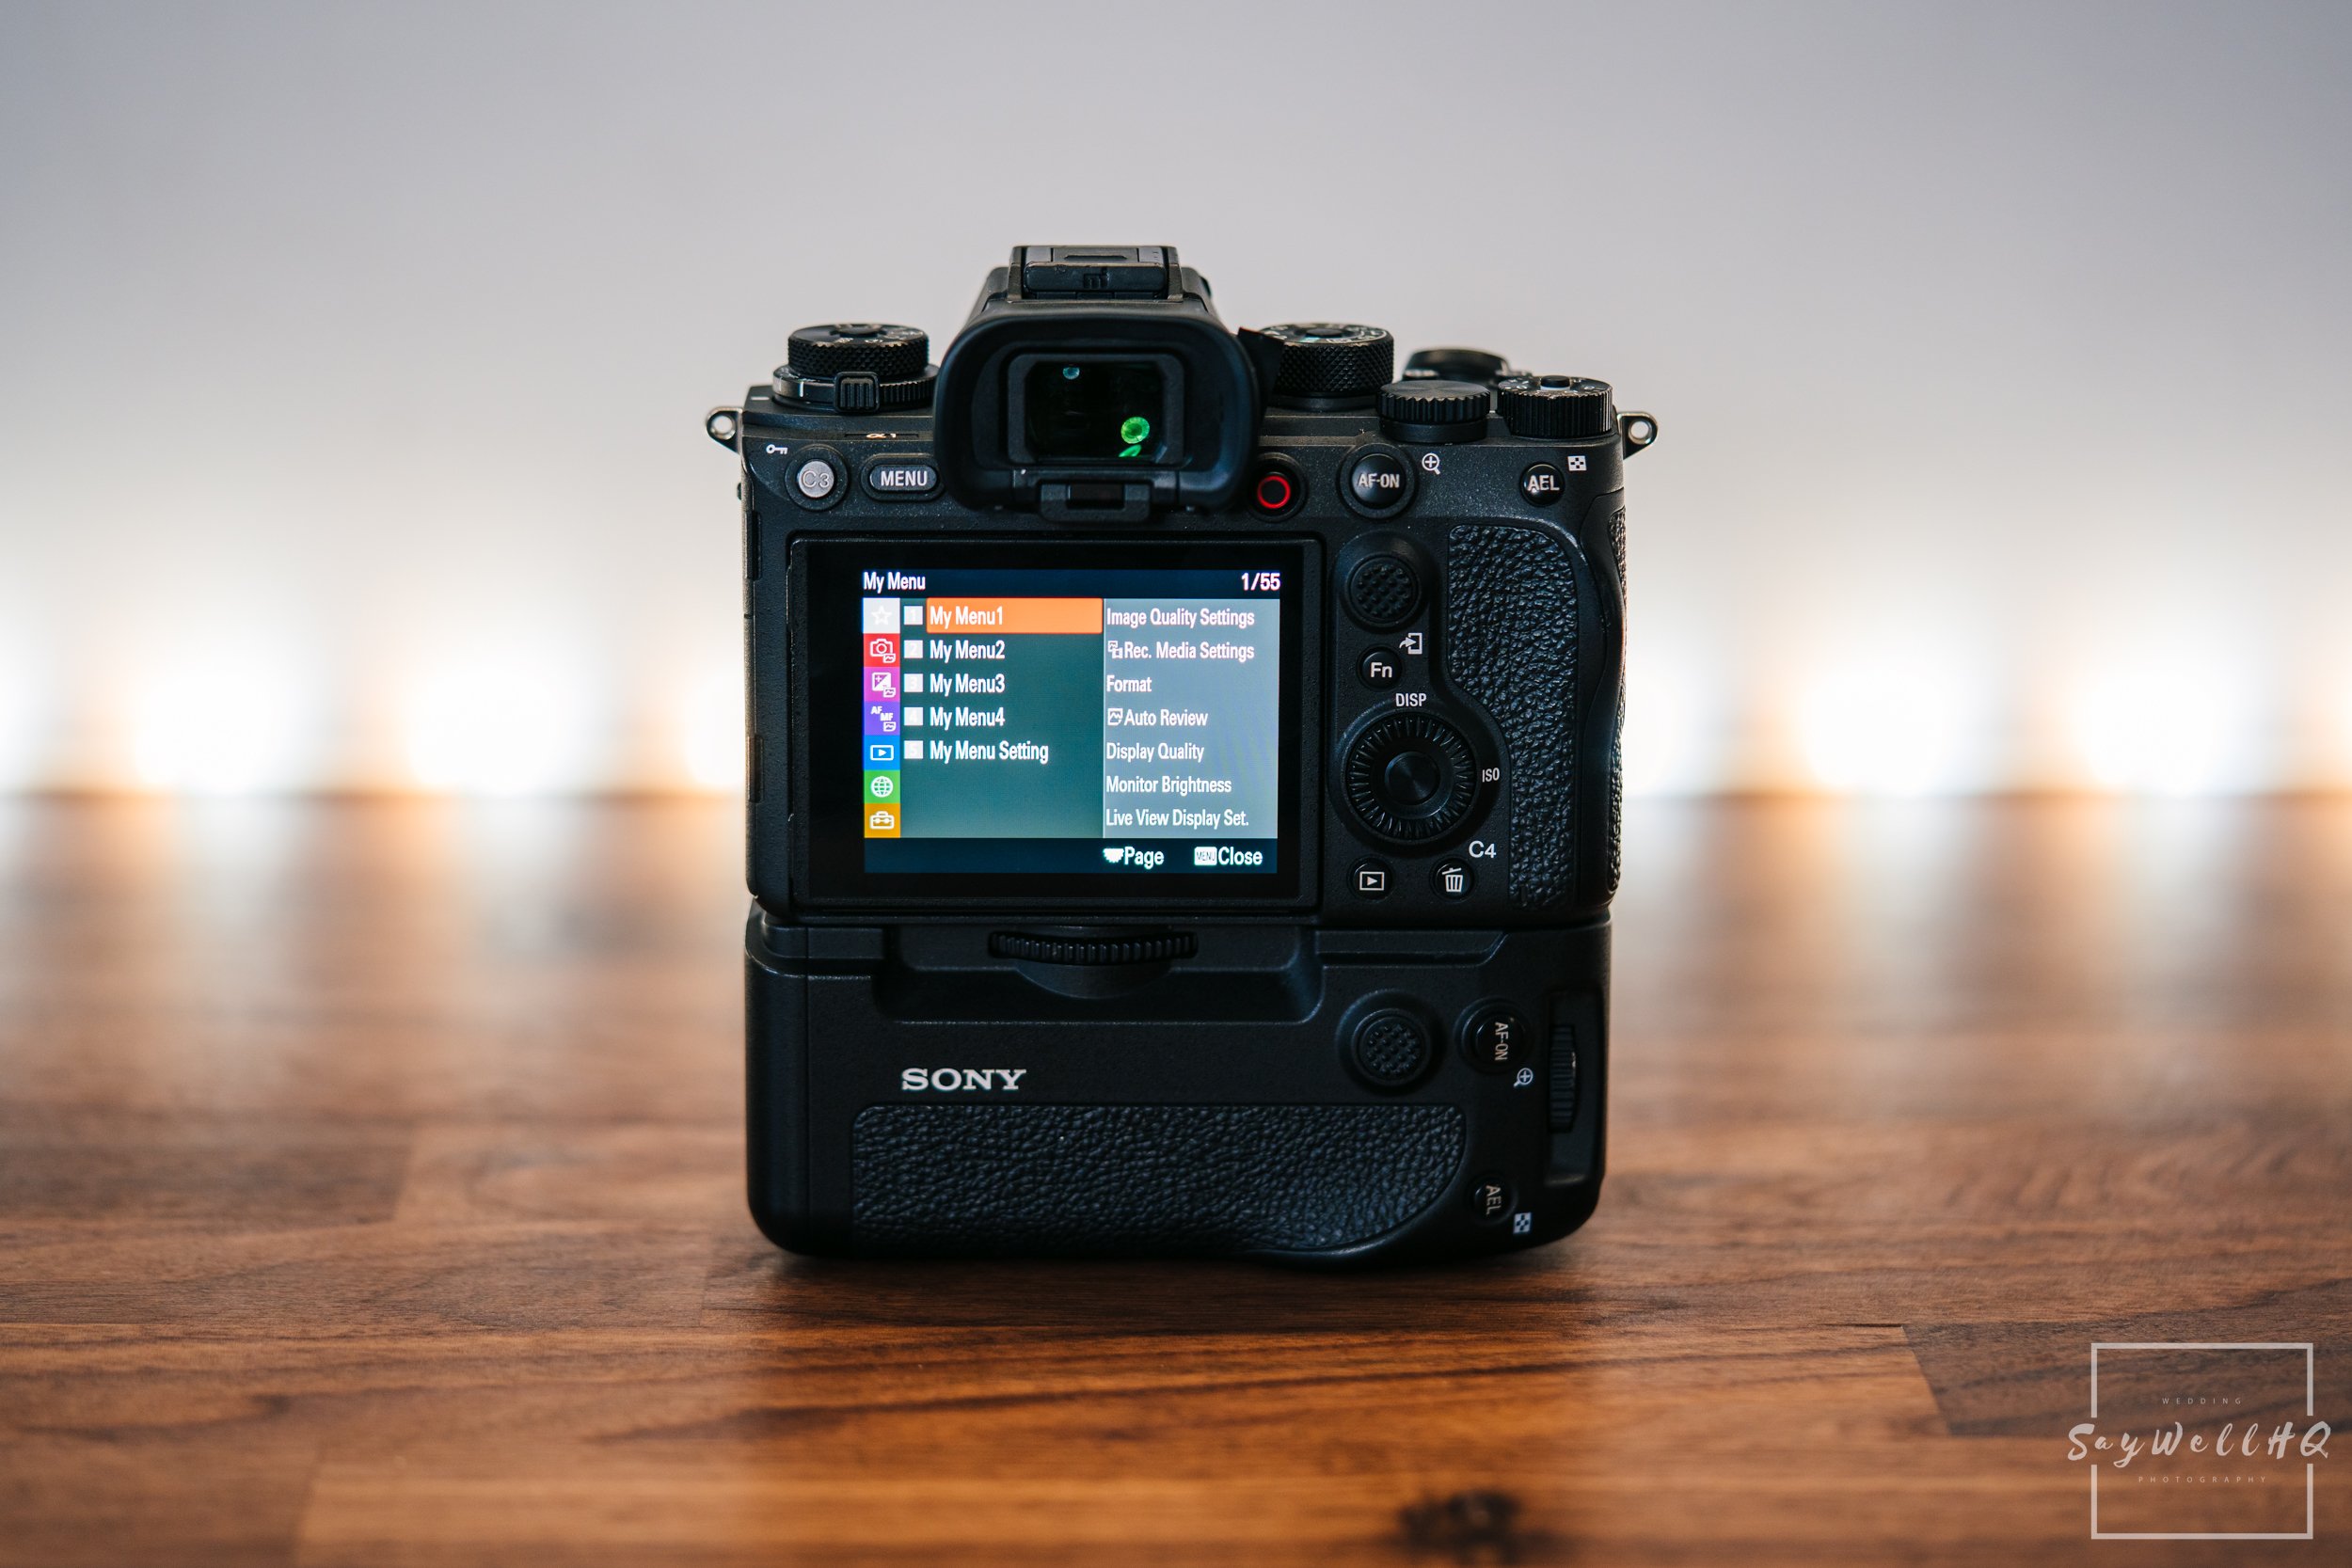 SONY A1 FOR WEDDING PHOTOGRAPHY | Picture showing the 'my menu' settings on the Sony A1 